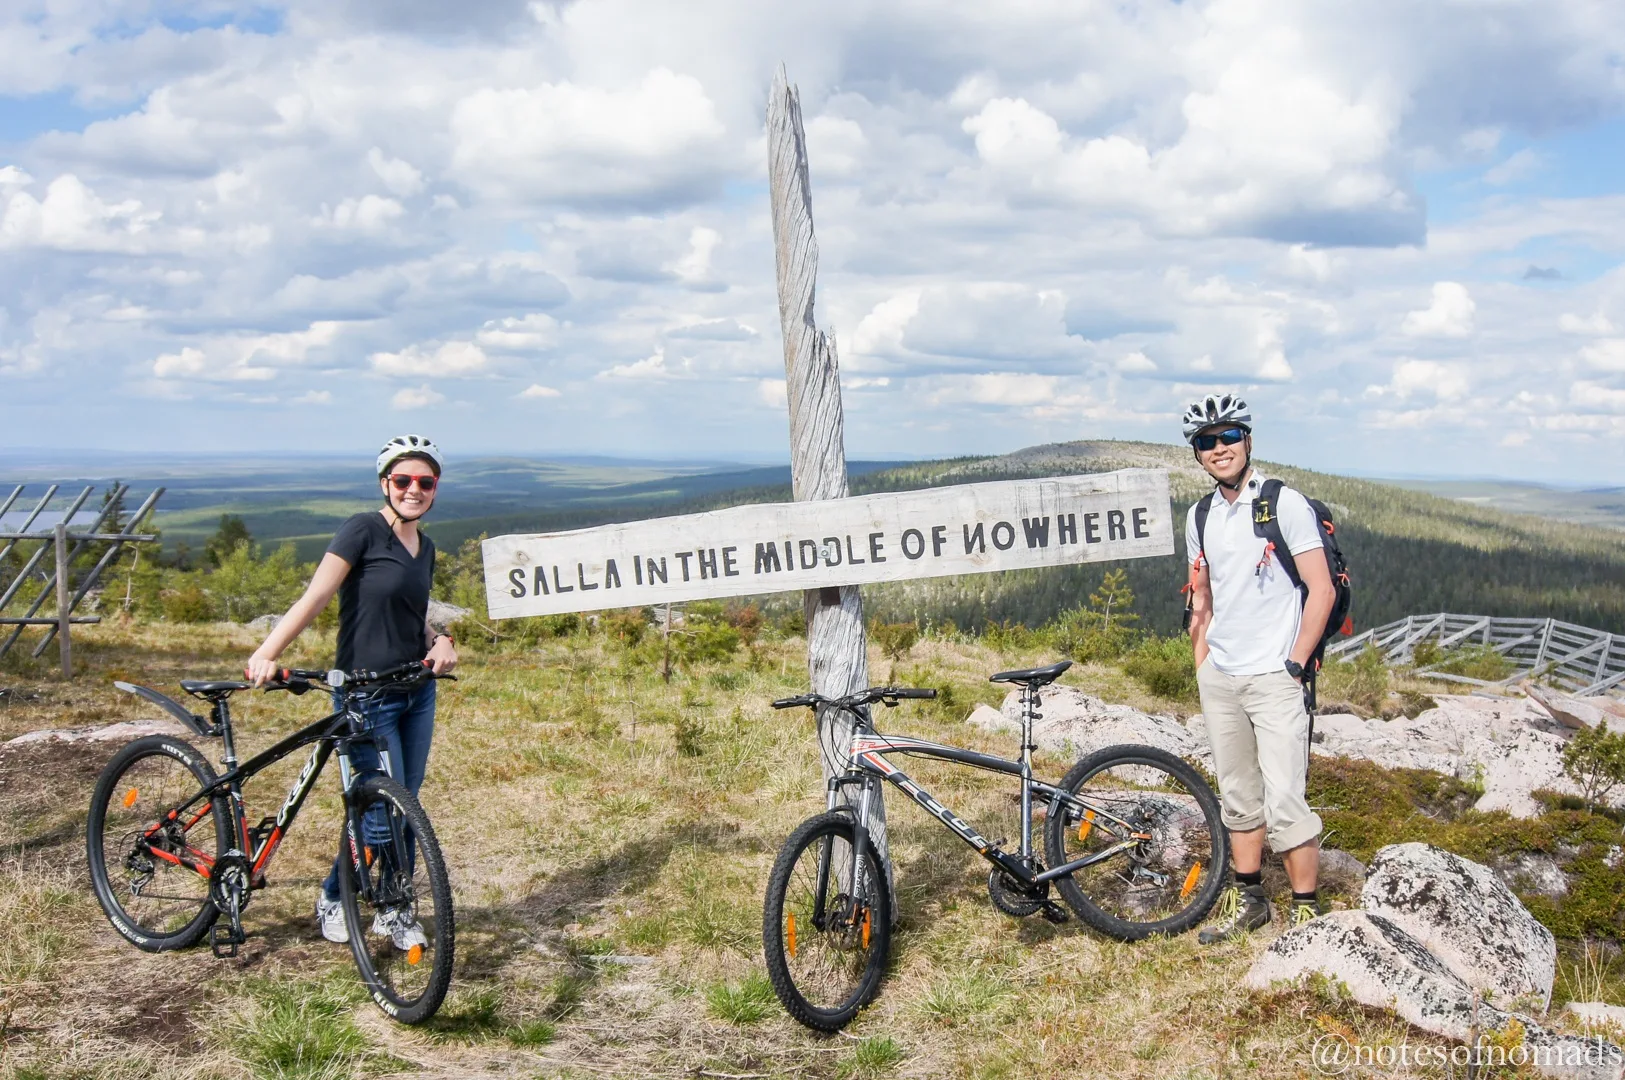 Fell mountain biking, Salla In the Middle of Nowhere